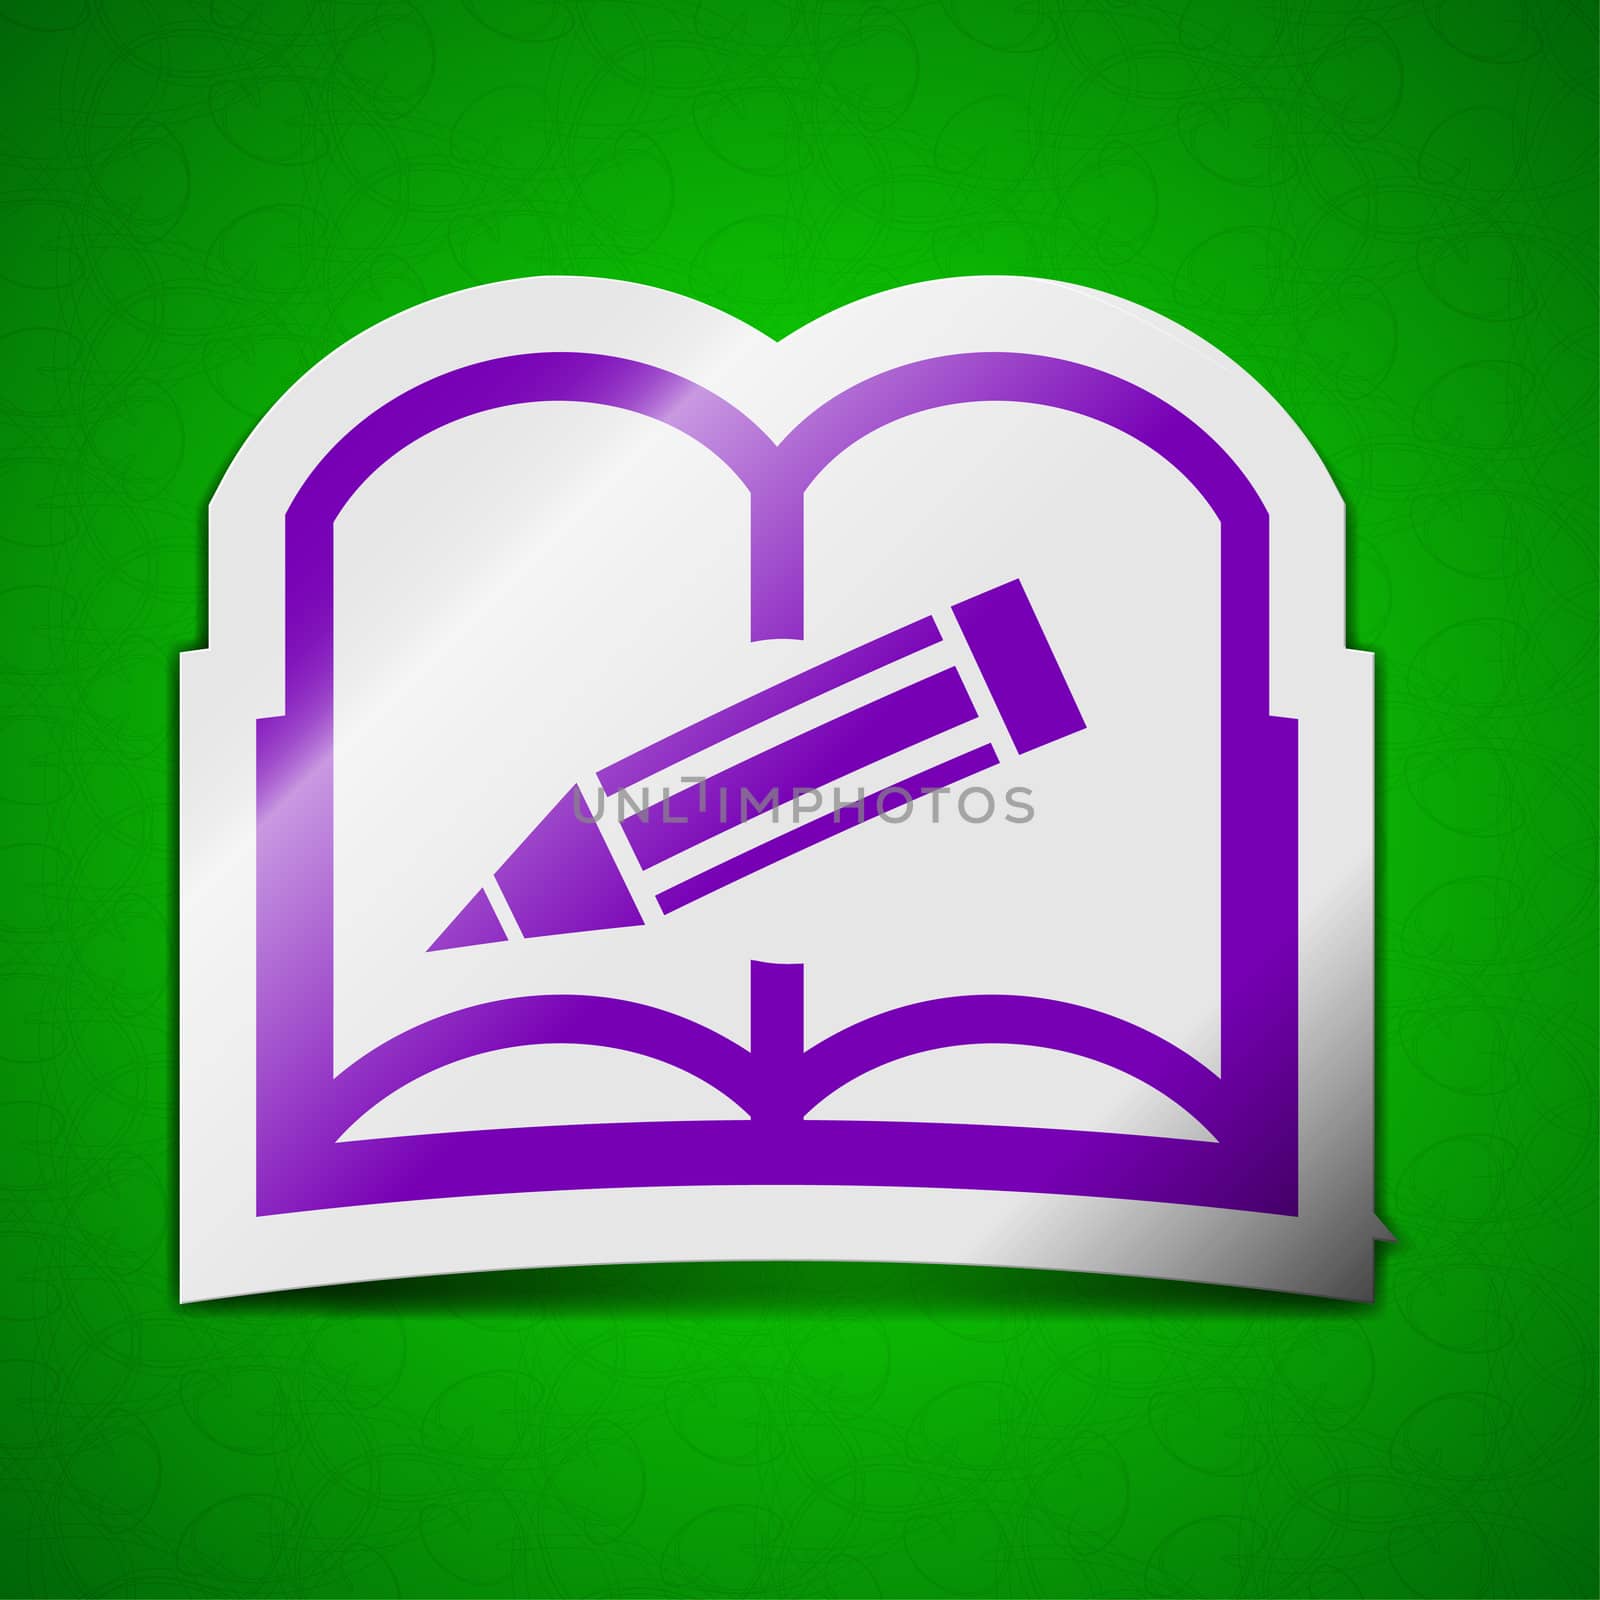 Open book icon sign. Symbol chic colored sticky label on green background.  illustration